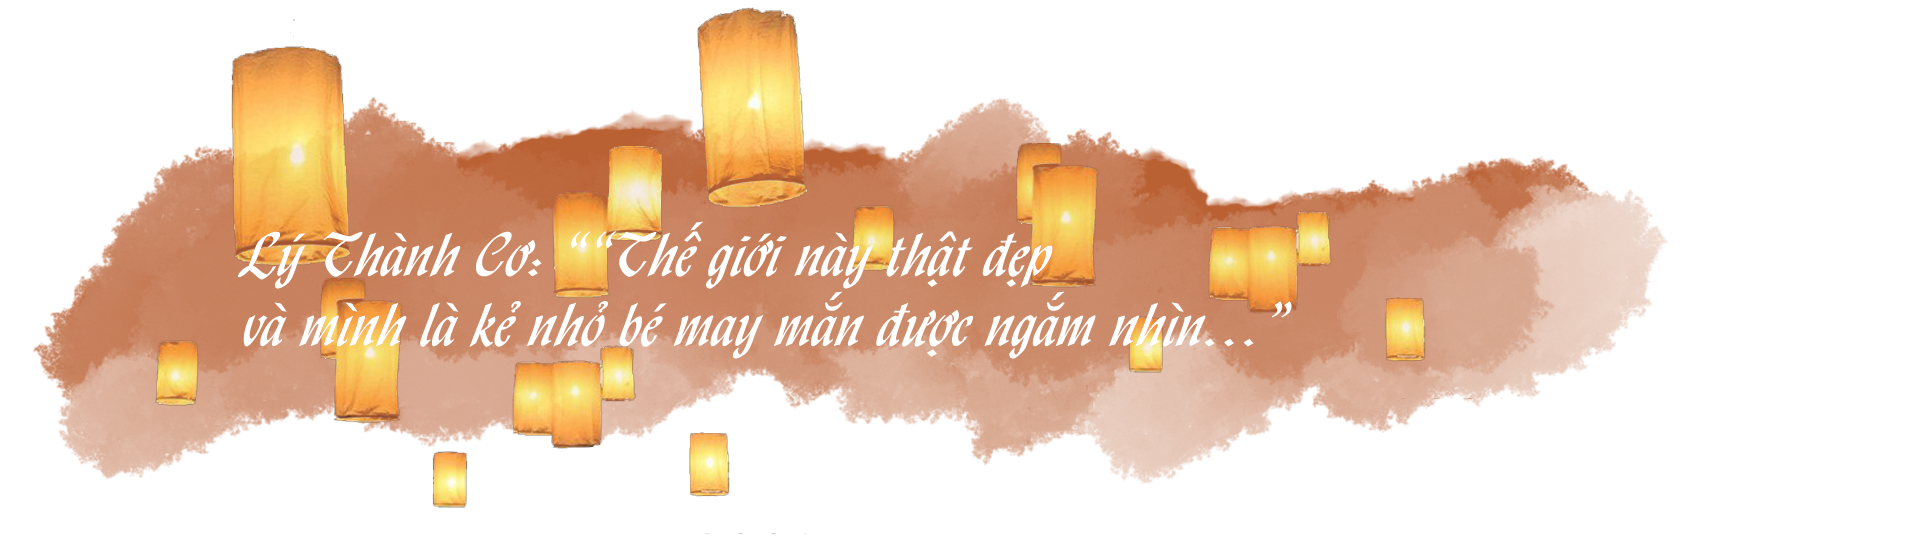 ly-thanh-co-text-1670904453.png